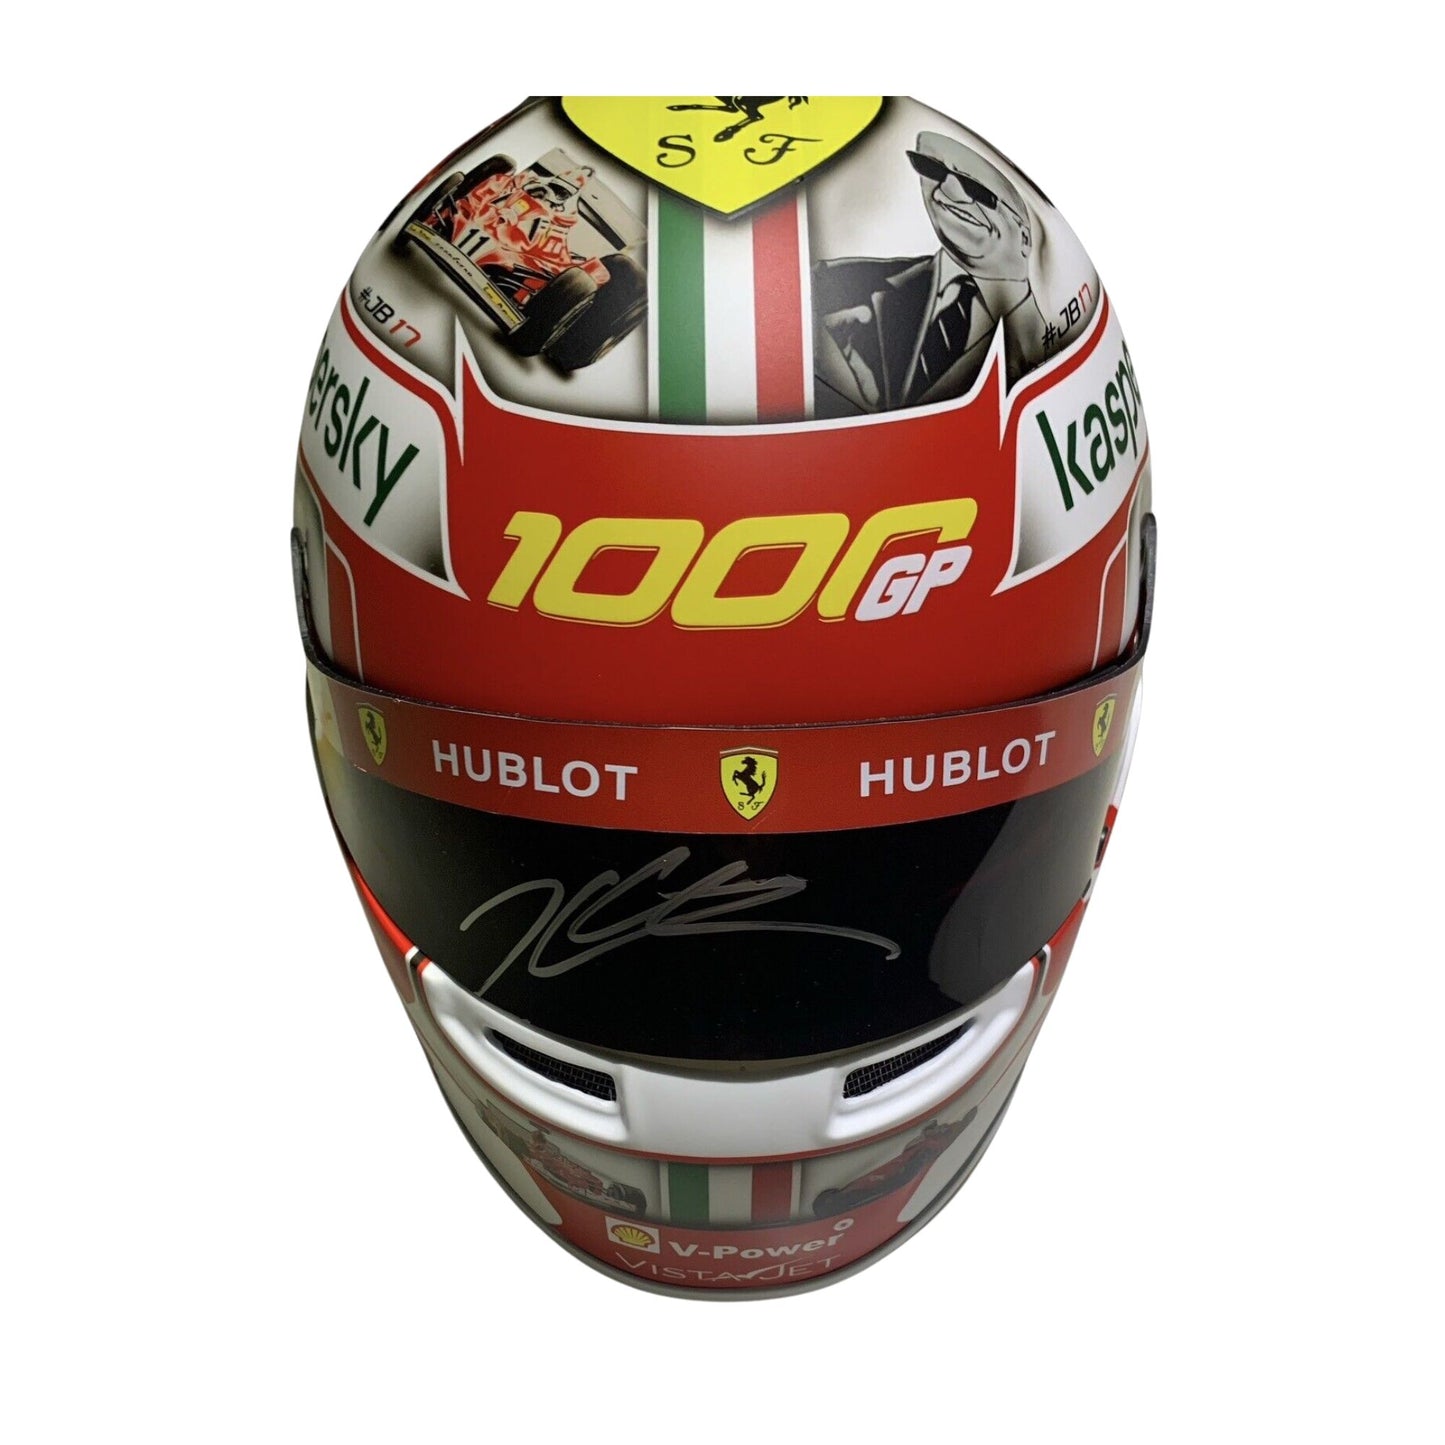 Charles Leclerc Signed Helmet - F1 Memorabilia - Front side view